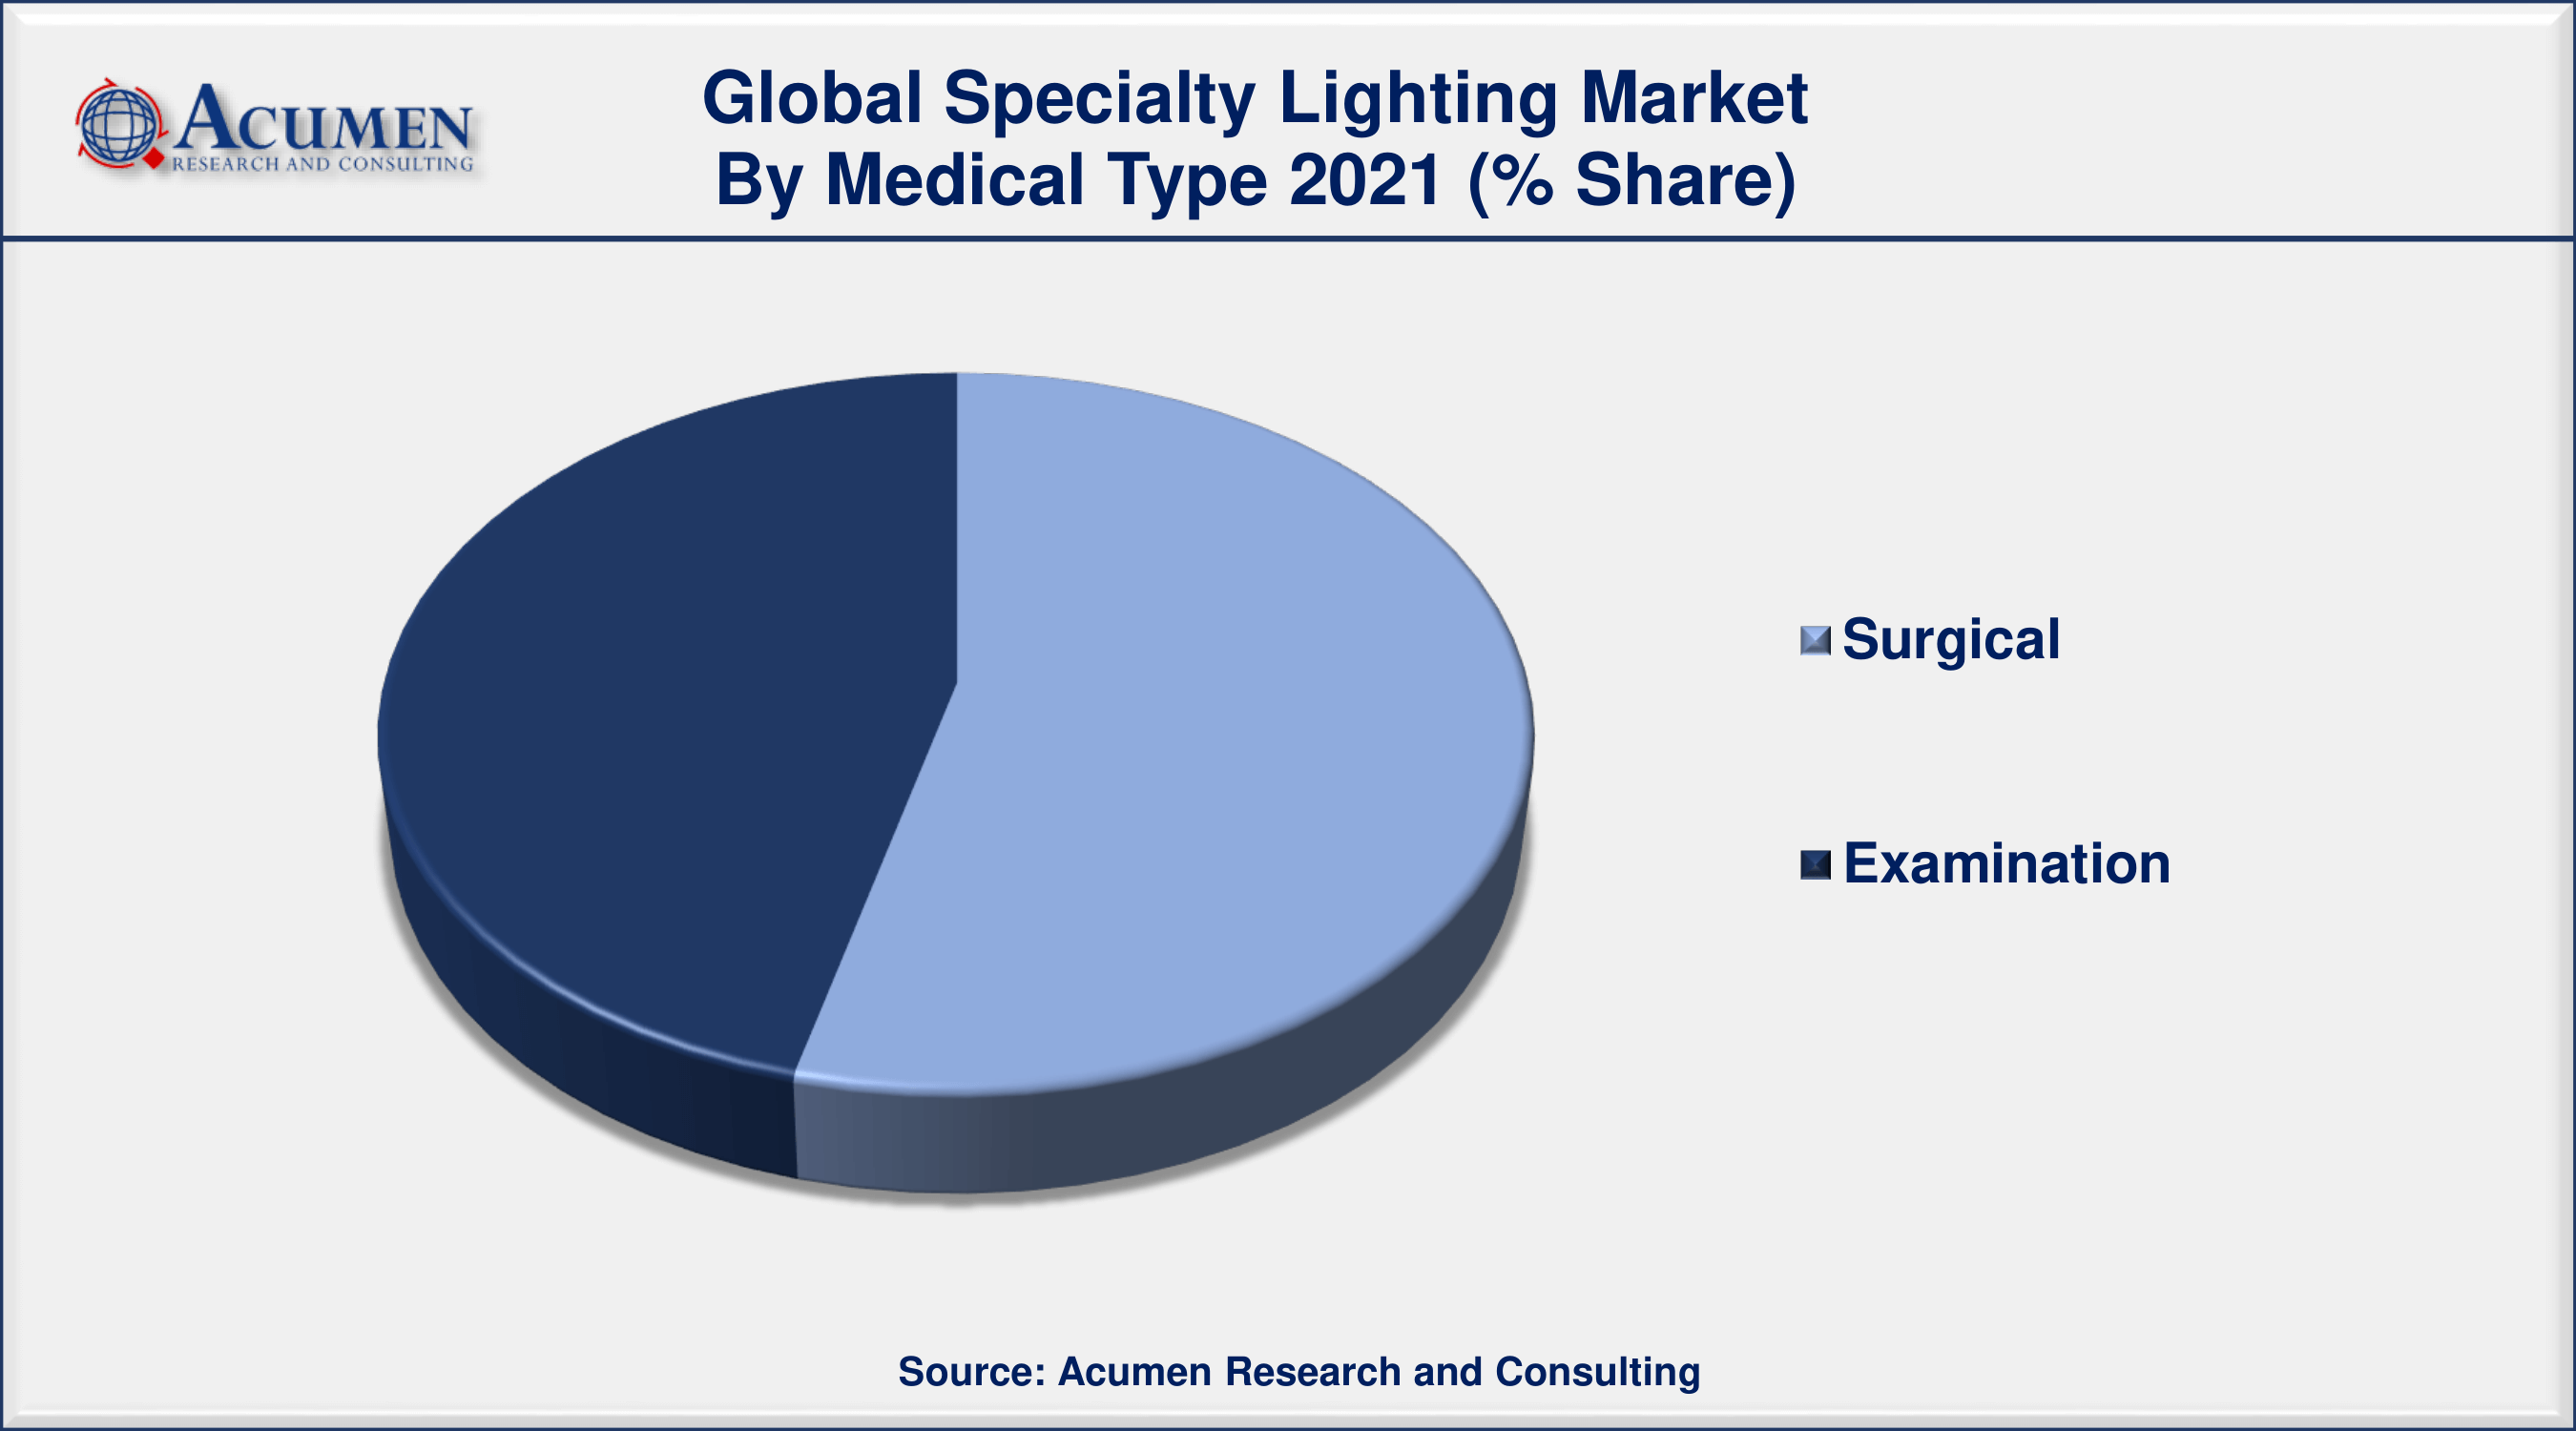 By medical type, surgical segment generated about 54% market share in 2021